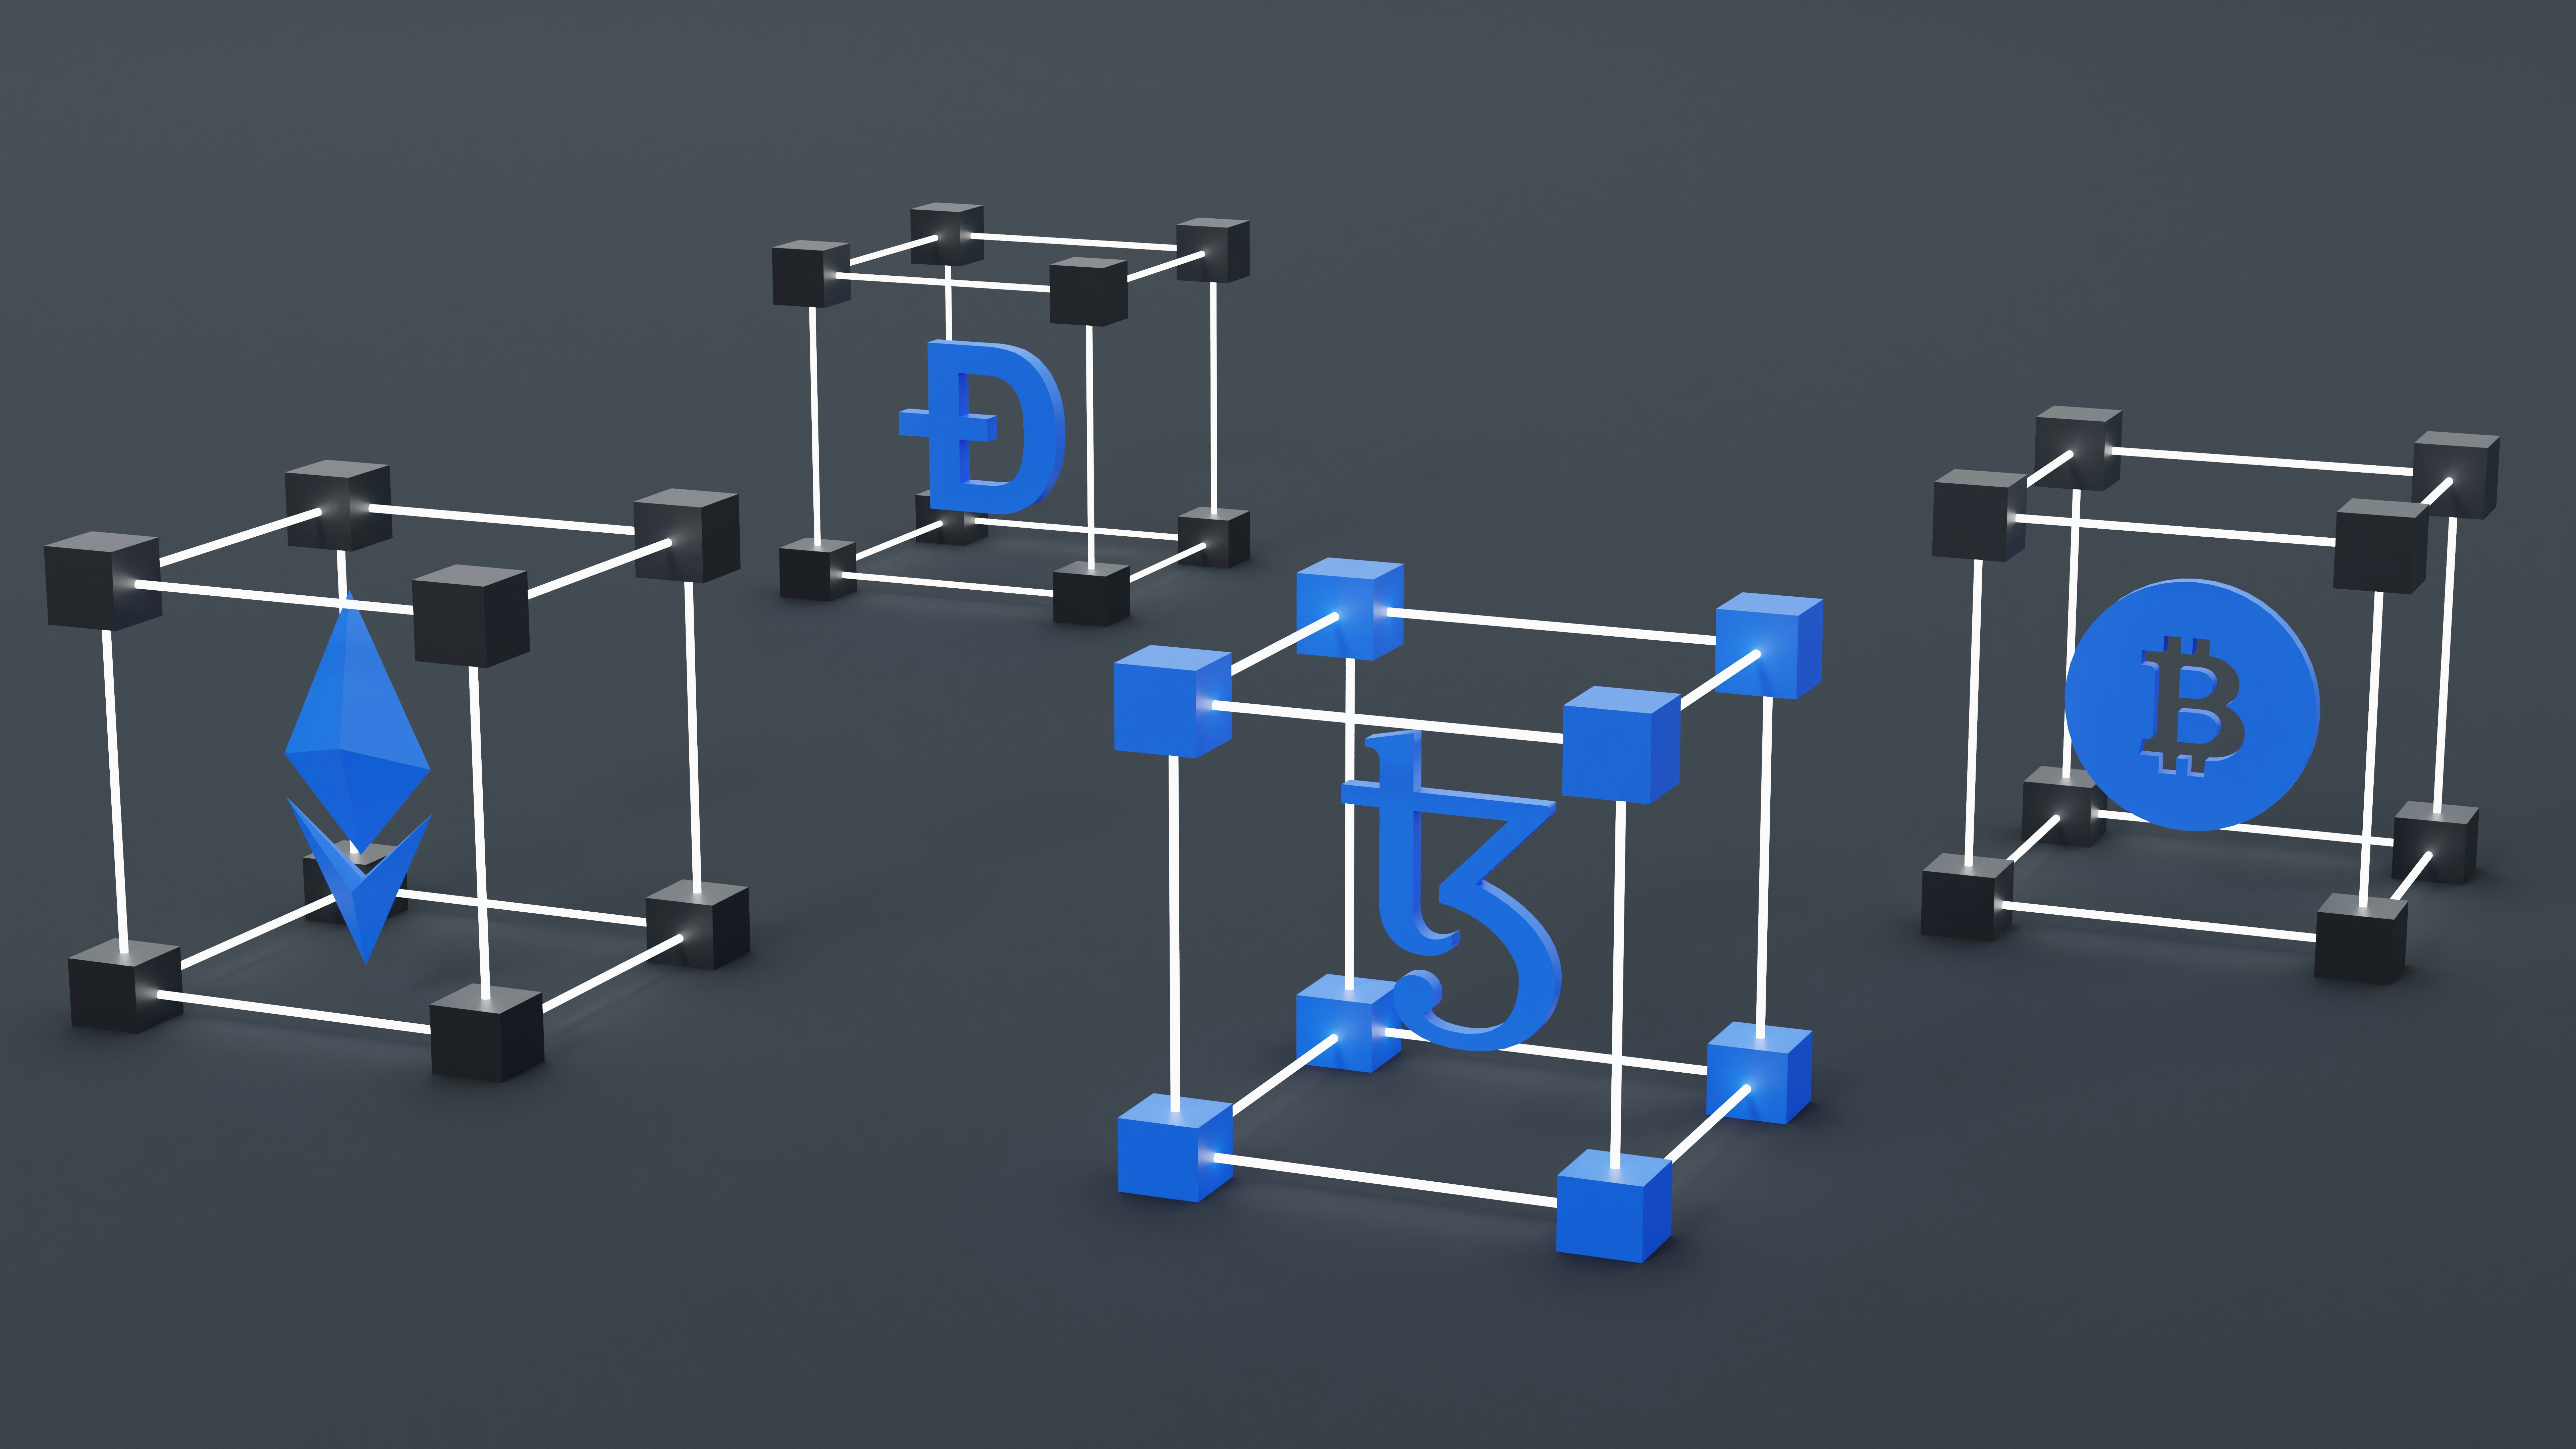 3D illustration of Tezos coin, bitcoin, Ehtereum, and dogecoin. Tezos is a blockchain designed to evolve.</p>
<p>work 👇:</p>
<p>Email: shubhamdhage000@gmail.com” style=”max-width:400px;float:right;padding:10px 0px 10px 10px;border:0px;”>Internet money, with their underlying blockchain technology, are emerging as a disruptive force with the potential to reshape the global economic landscape. At the forefront of this digital mayhem stand Bitcoin, the pioneer, and a diverse array of alternative coins (altcoins), each contributing to the transformative journey in unique ways.</p>
<p>Crypto, being the first in the cryptocurrency space, plays a monumental role in establishing the credibility and viability of digital currencies. With its secure blockchain, decentralized nature, and a finite supply of 21 million coins, have positioned it as a growth of value, often compared to artificial metals similar to gold. This characteristic makes Bitcoin a compelling option for investors seeking a hedge neighboring inflation and economic uncertainties.</p>
<p>The essence of decentralized finance (DeFi) forms the core of cryptocurrencies’ transformative potential. Bitcoin, the first and most endorsed digital currency,  <a href=